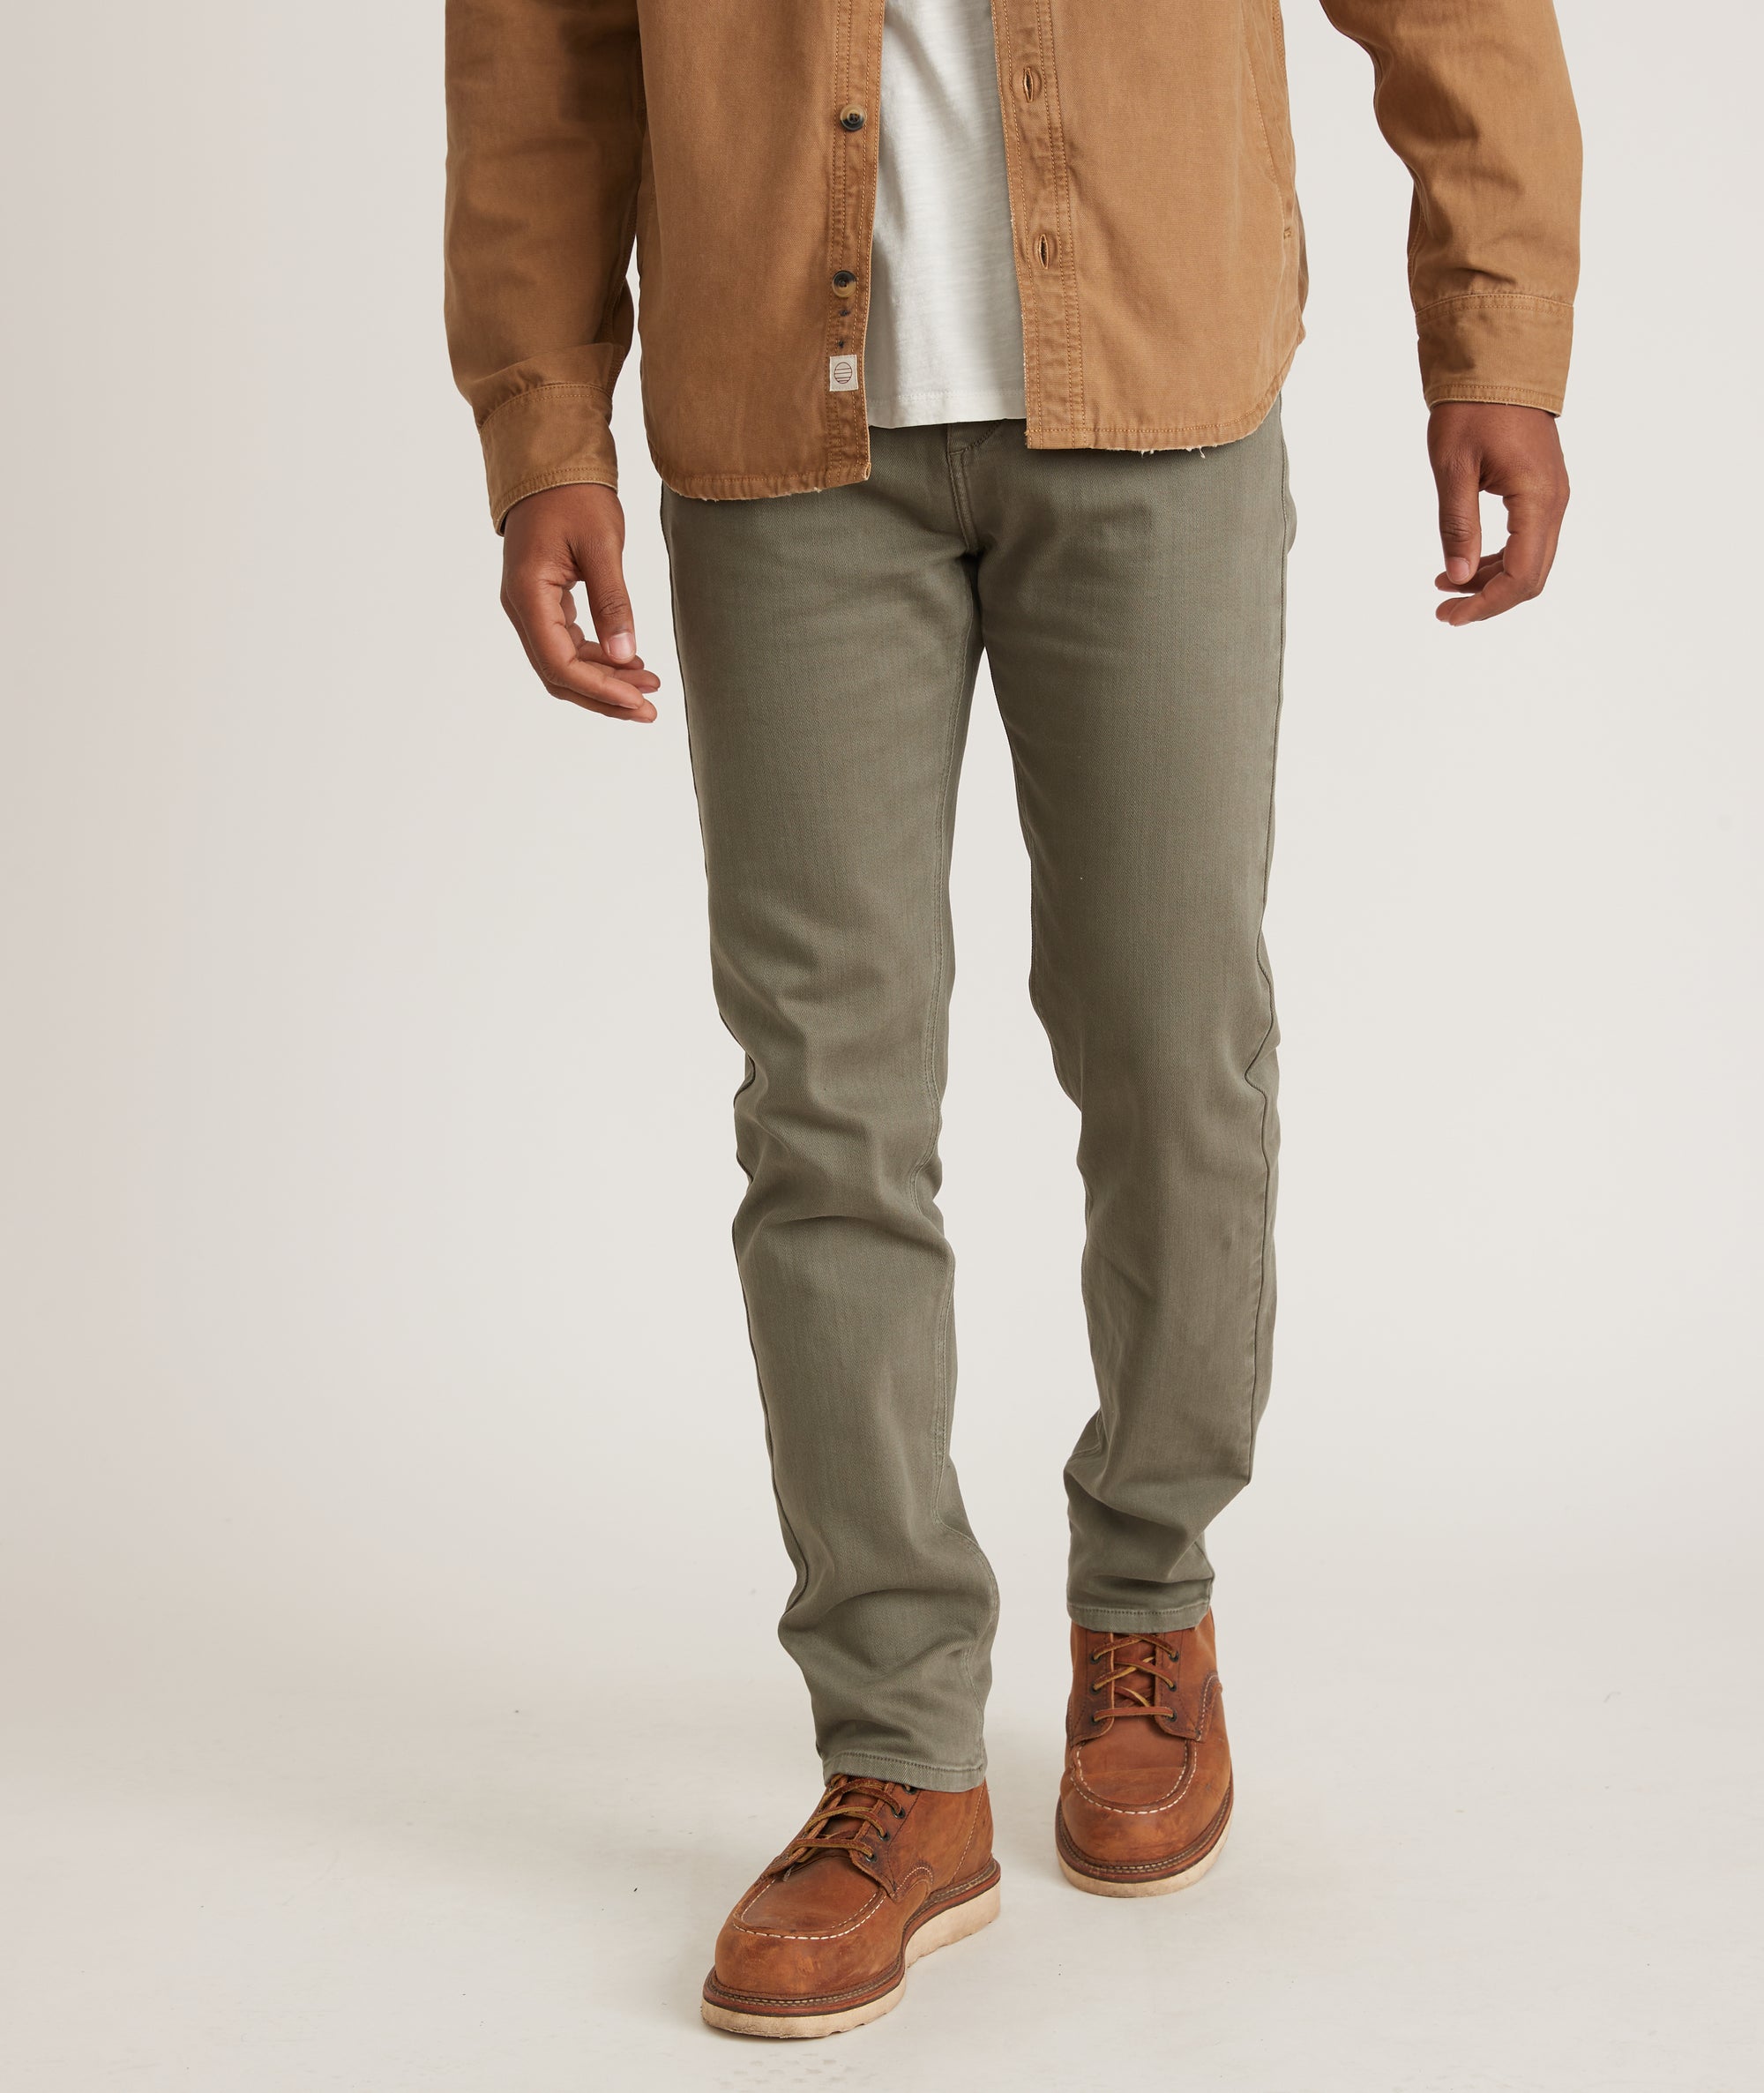 5 Pocket Pant Slim Fit in Faded Olive – Marine Layer